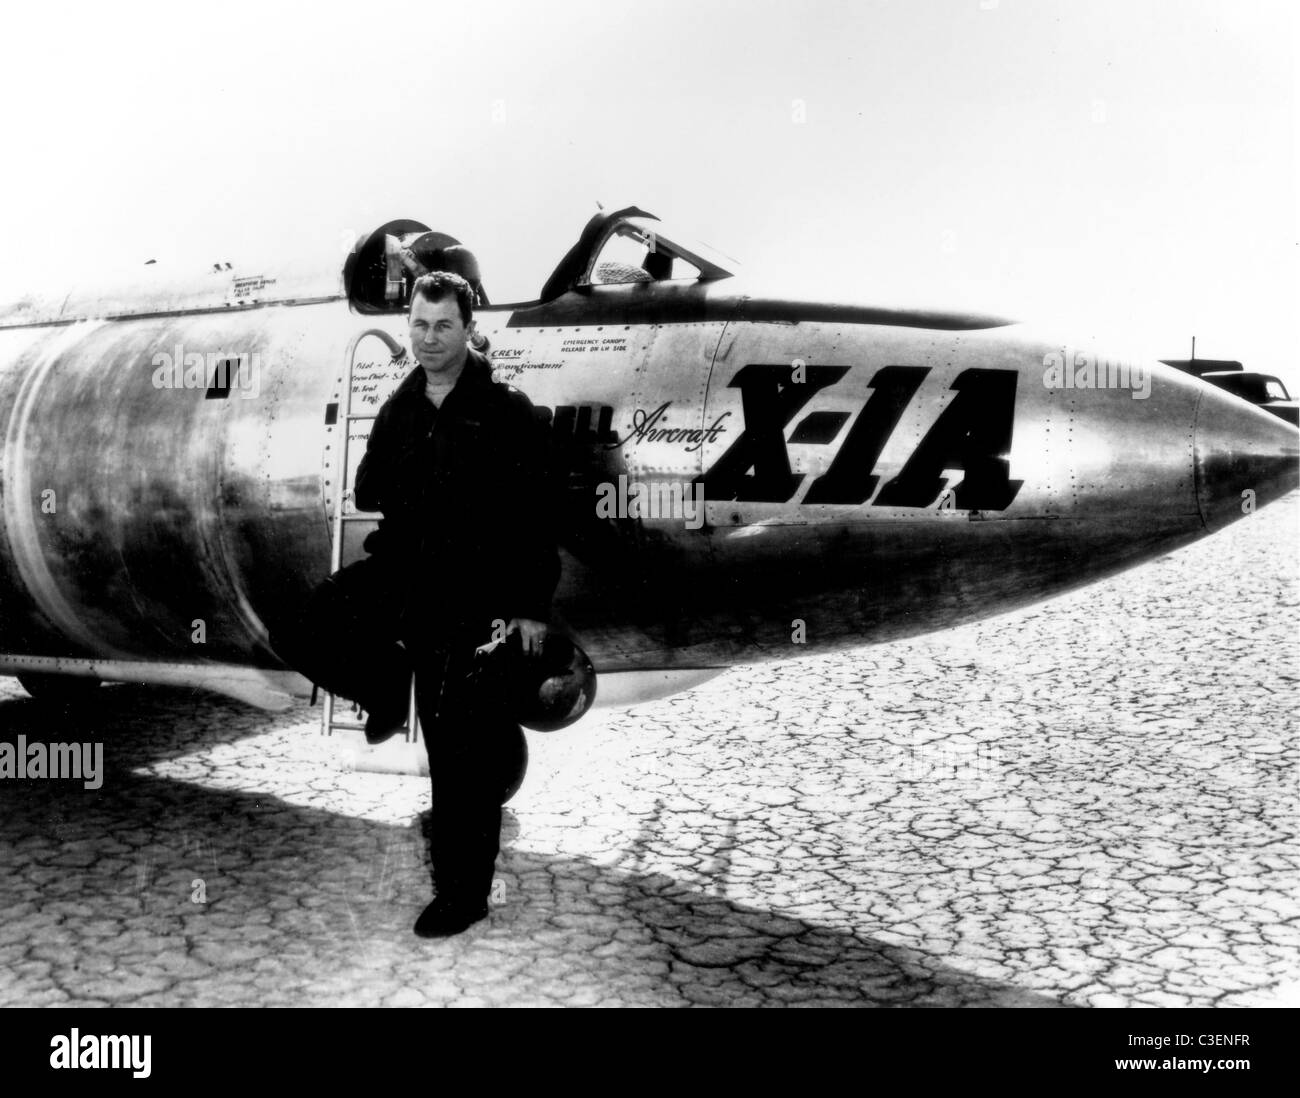 Capt. Charles E. Yeager in front of Air Force's Bell-built X-1 supersonic research aircraft. Stock Photo